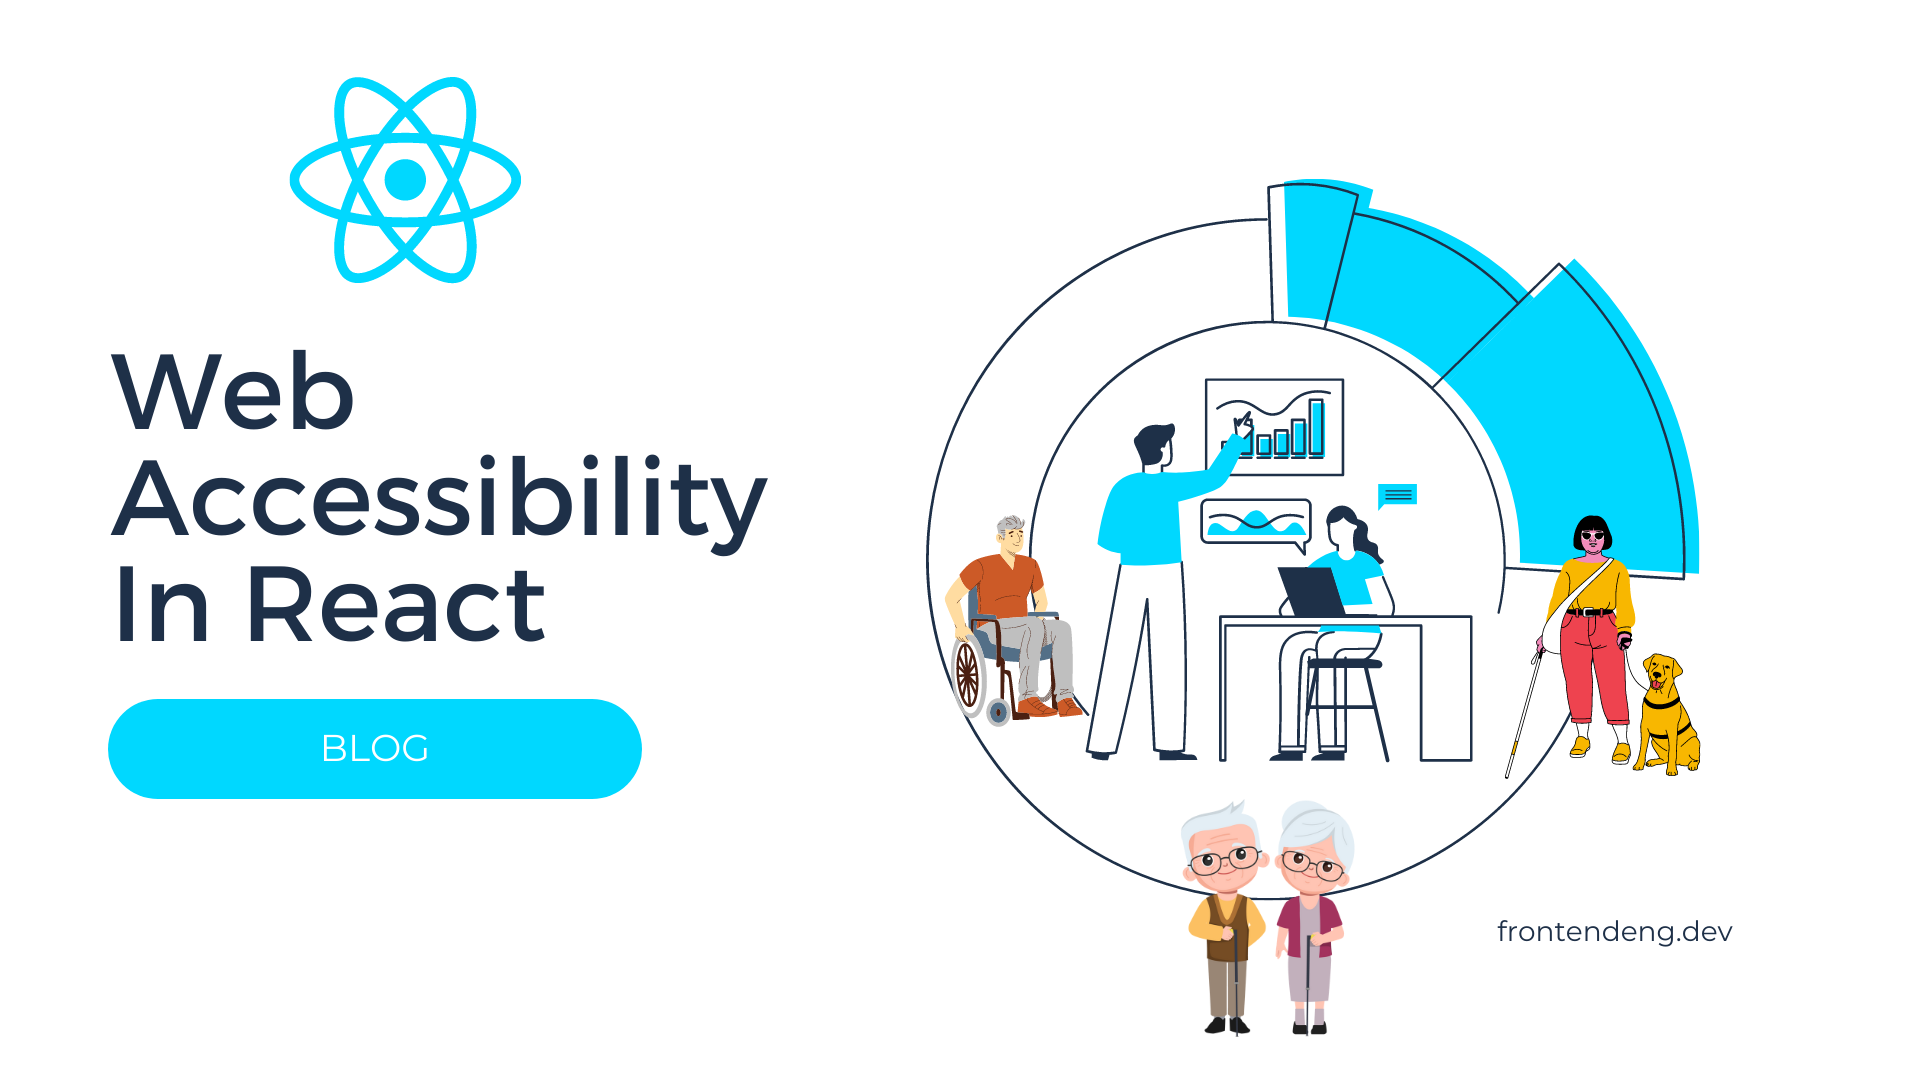 Guide for building accessible websites in react